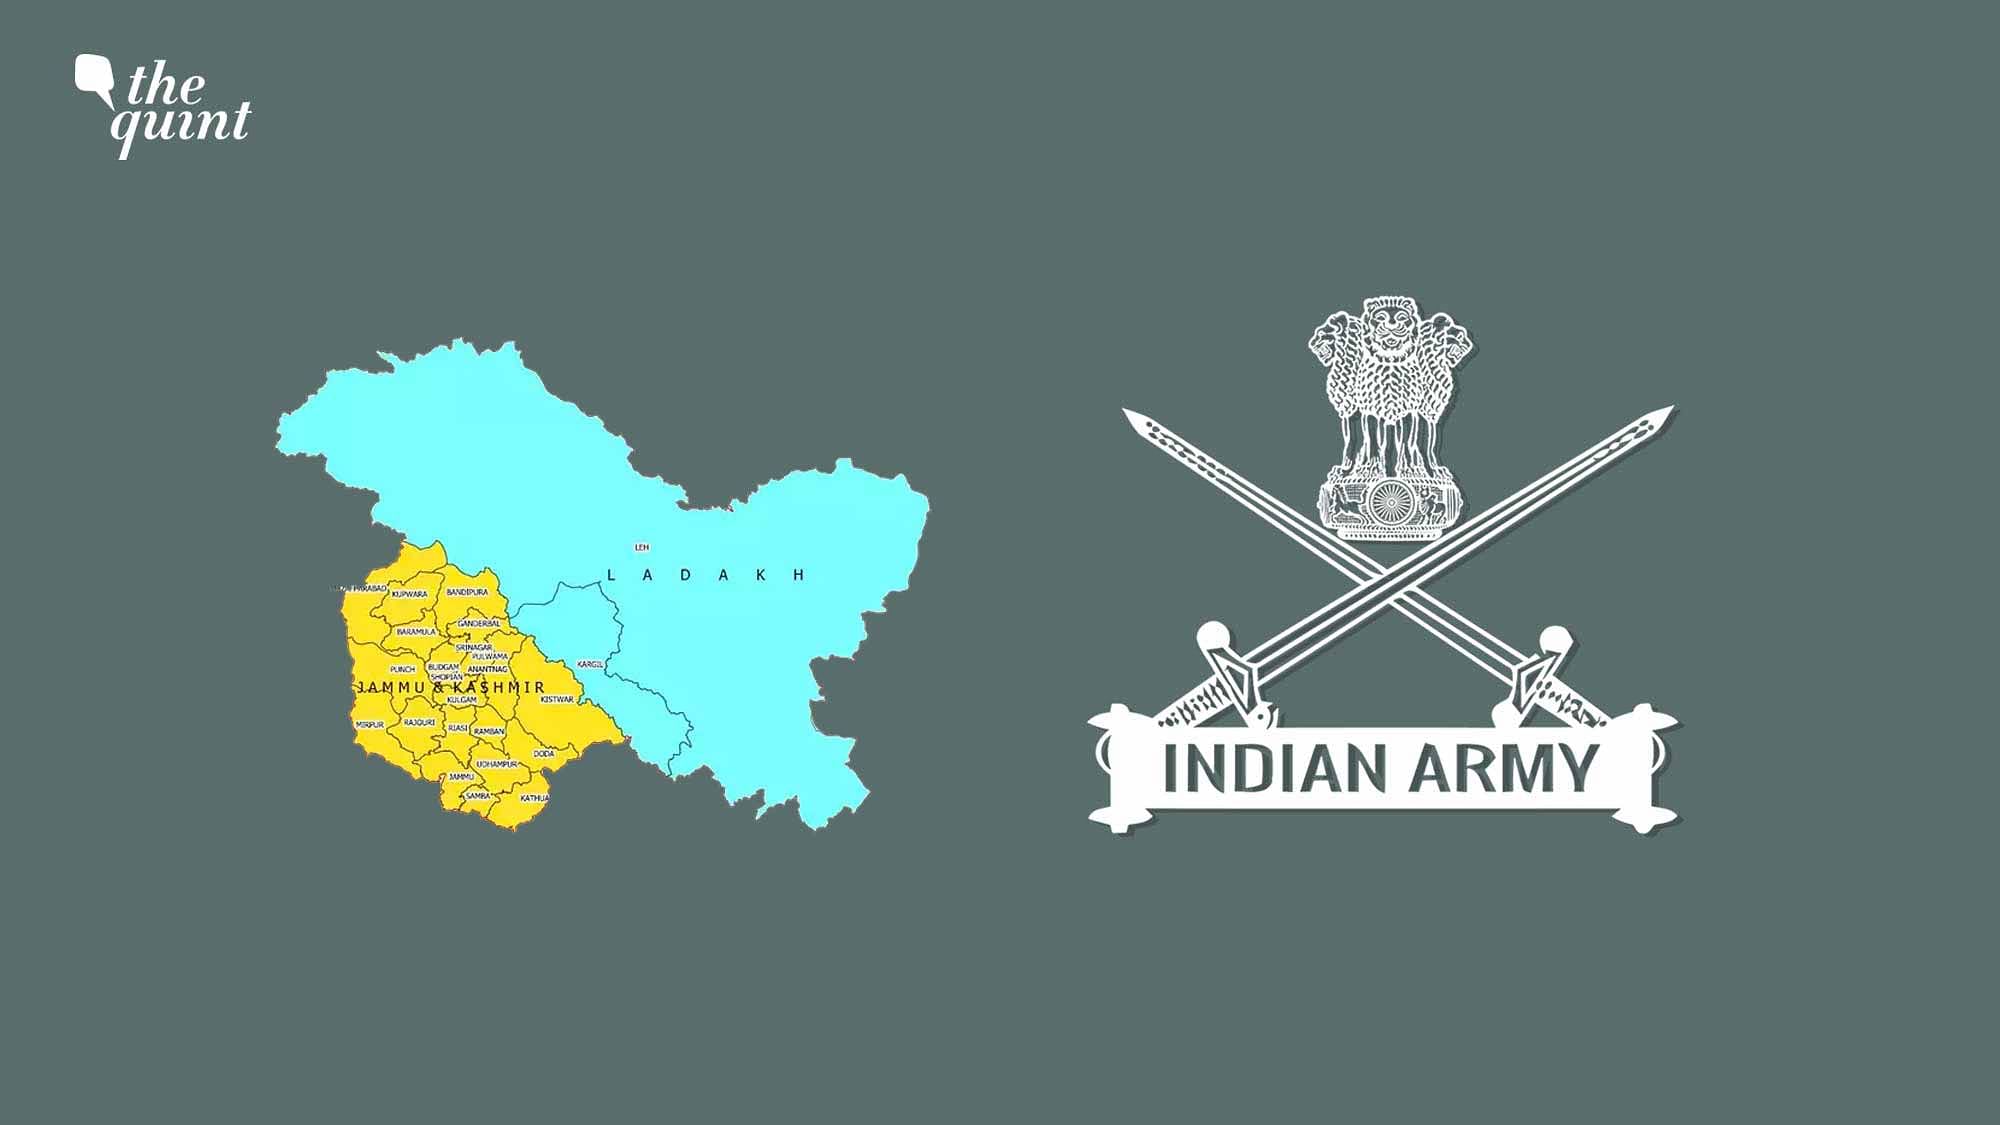 Image of Indian Army symbol + maps of J&amp;K and Ladakh – the two new union territories – used for representational purposes.